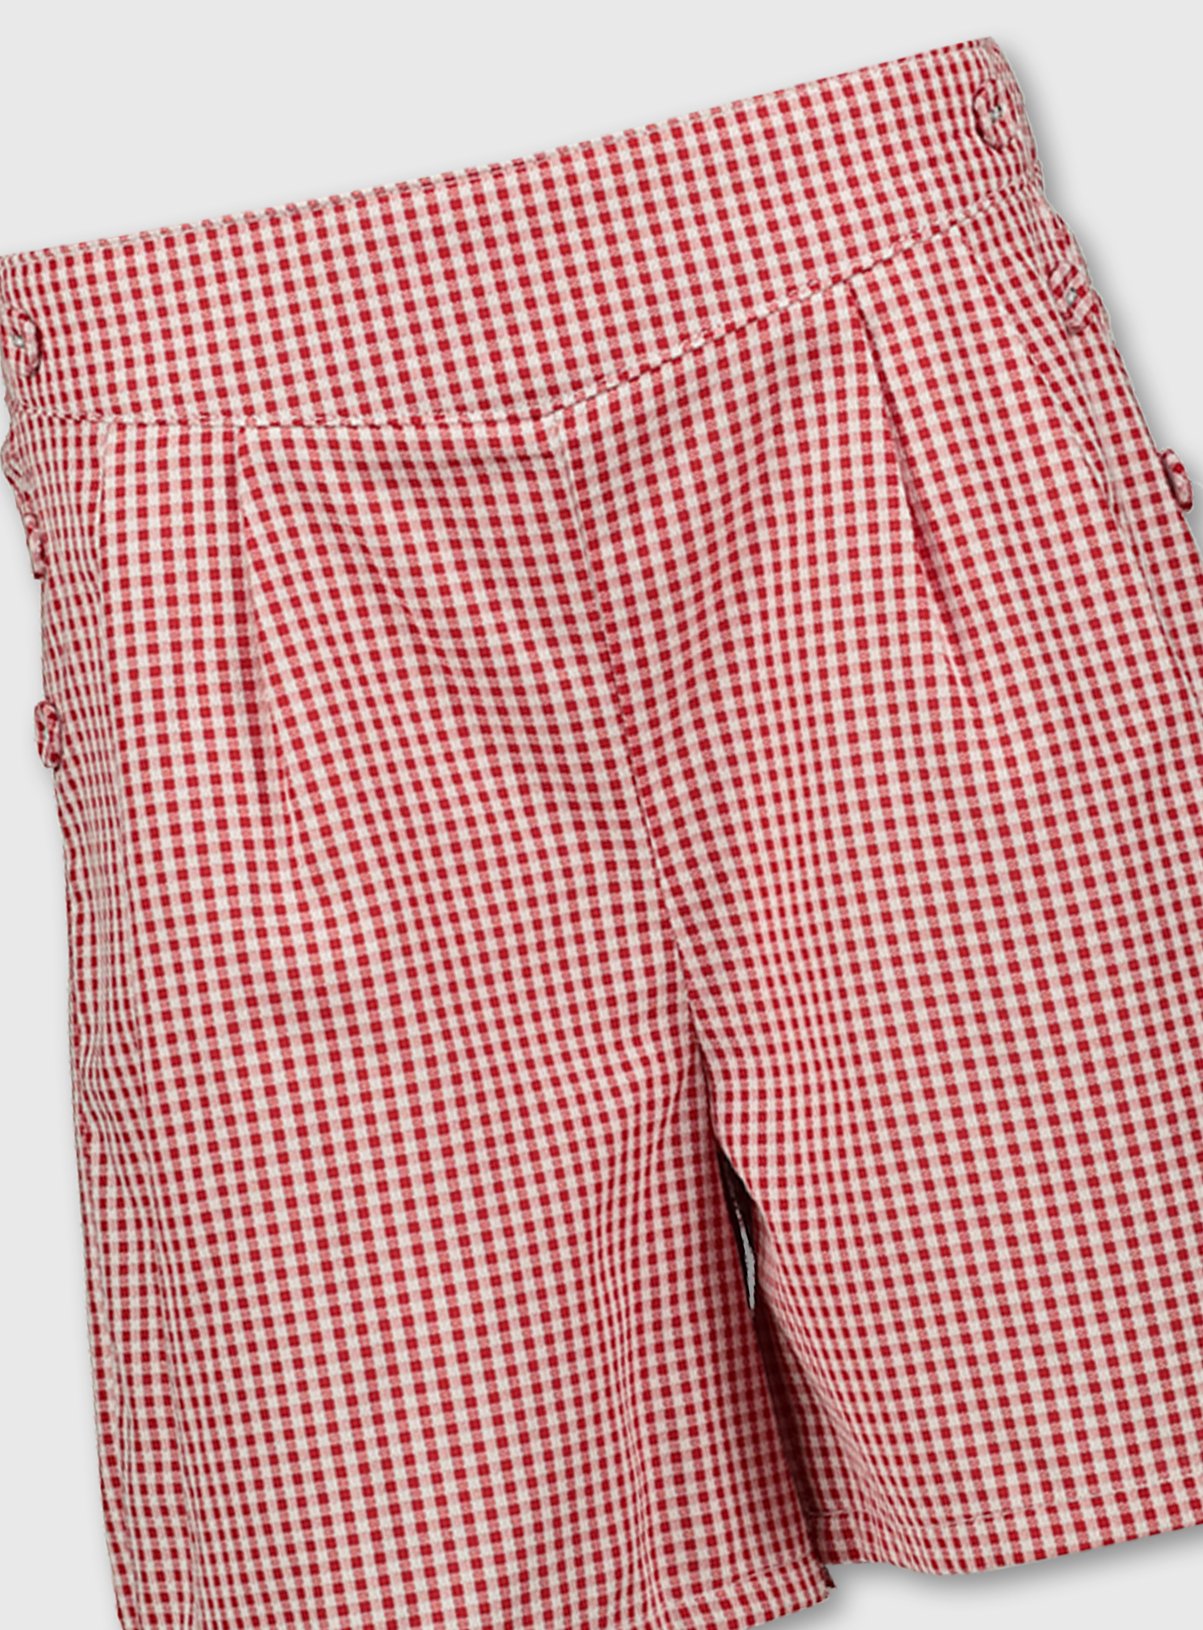 Buy Red Gingham School Culottes - 14 